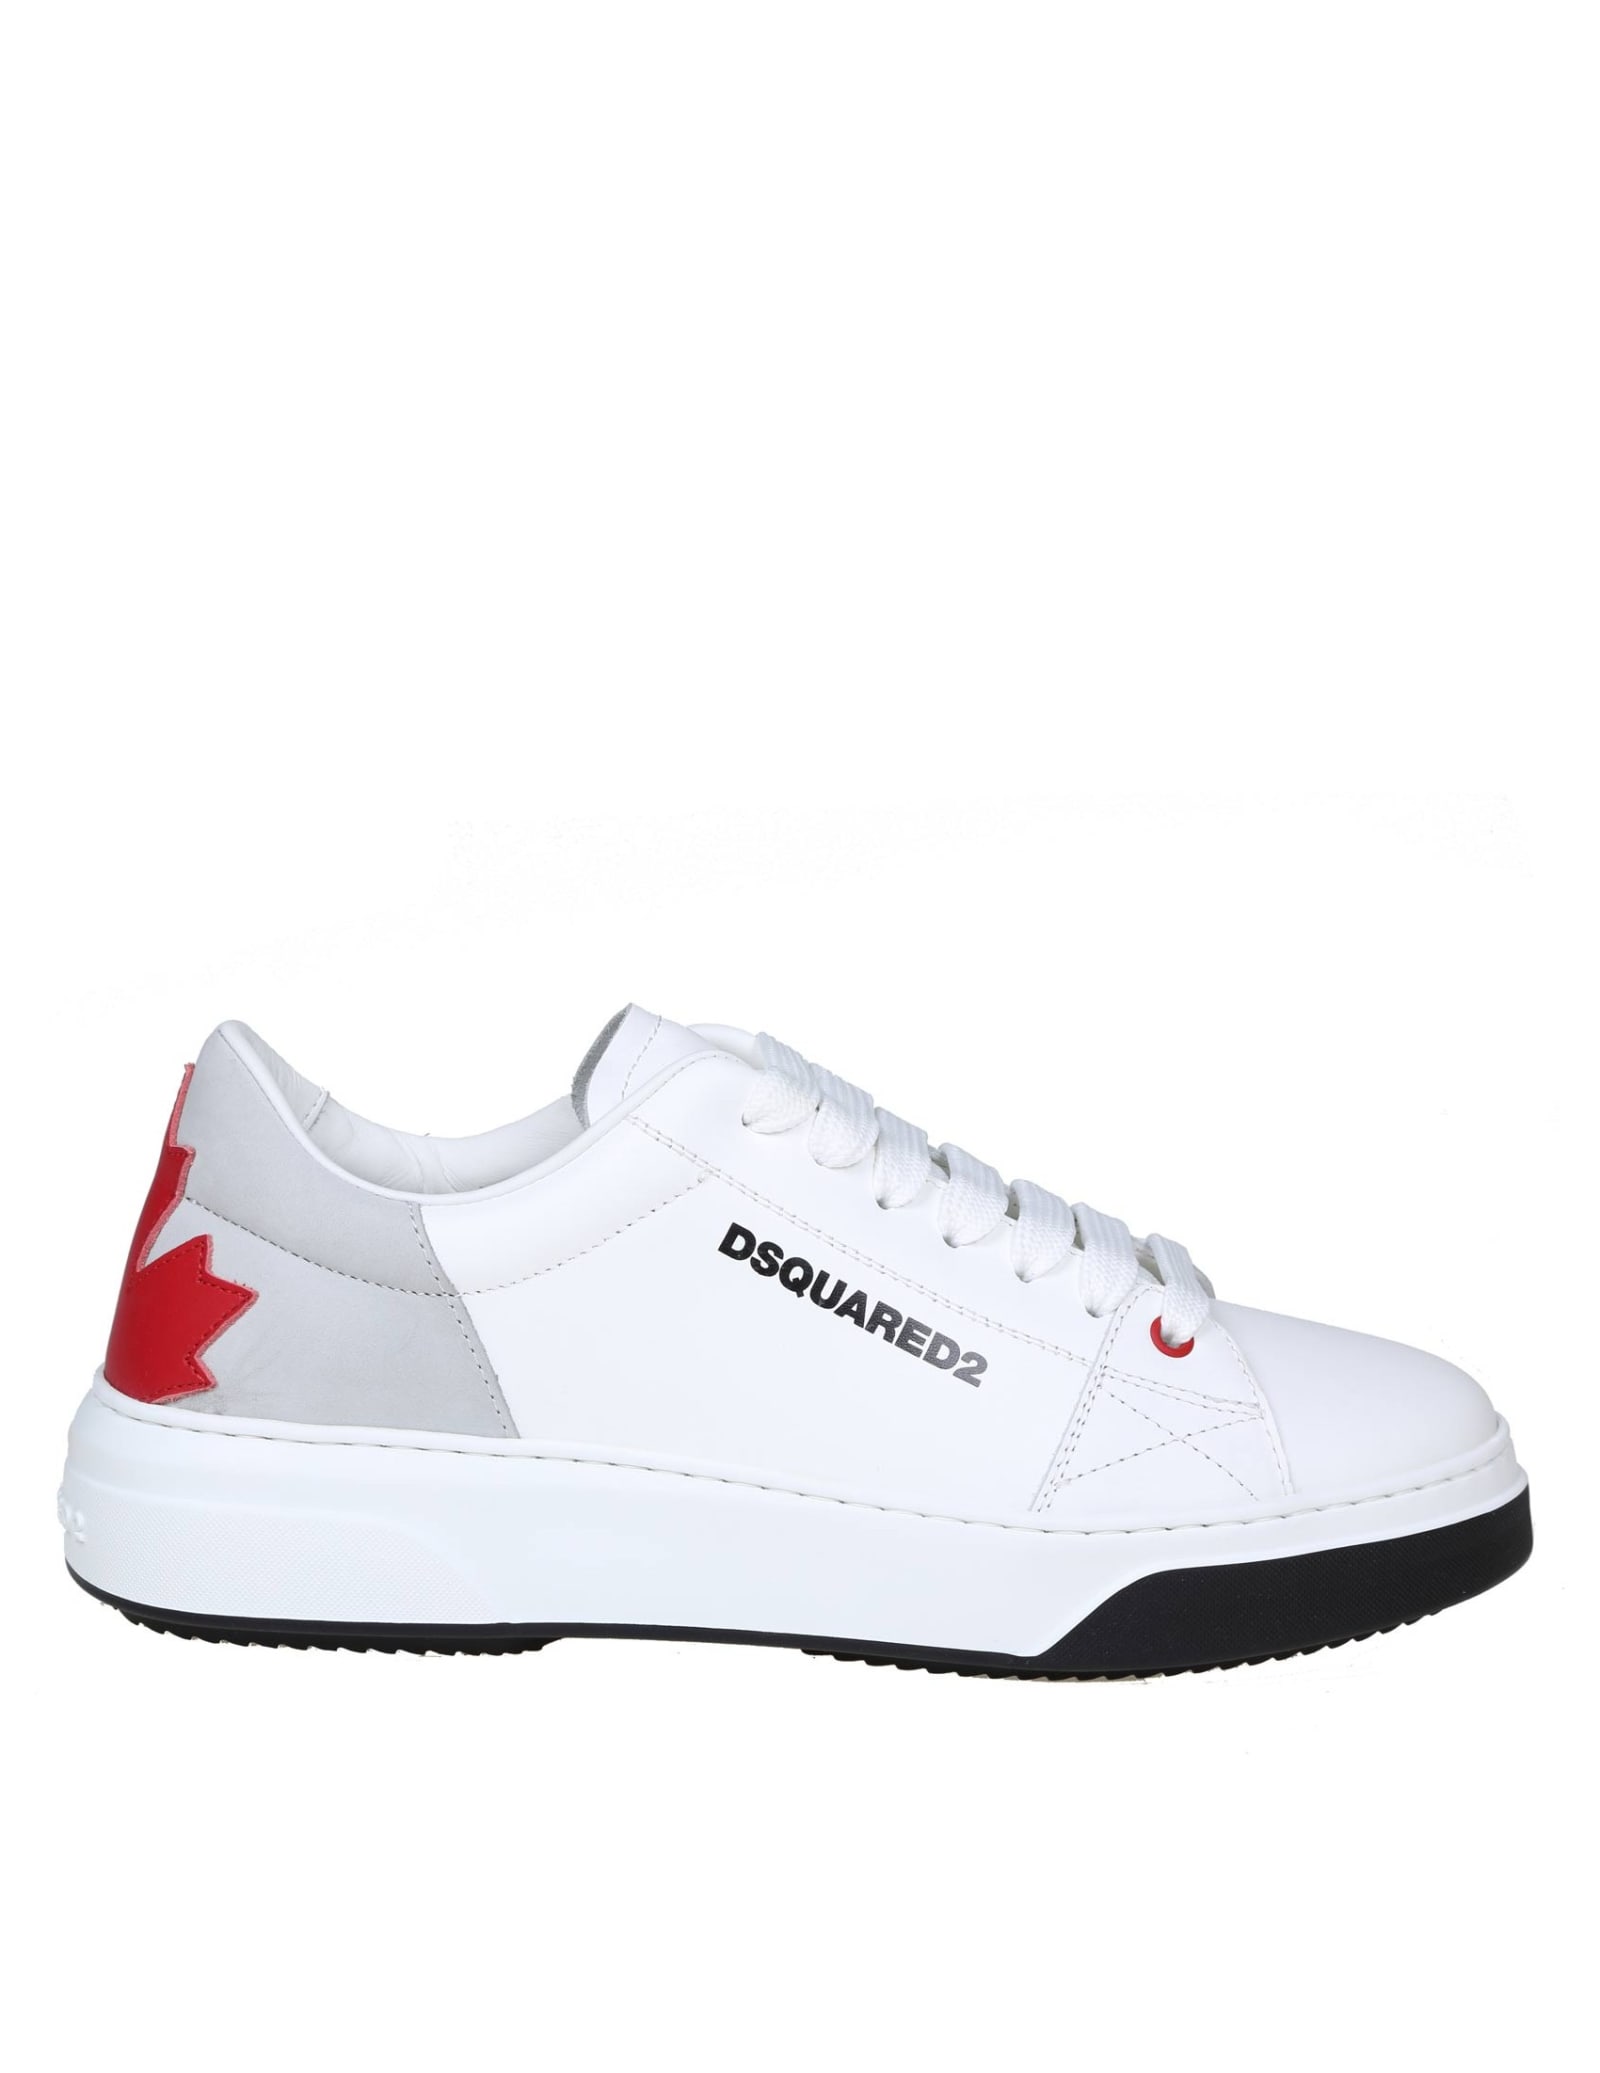 Dsquared2 Bumper Sneakers In White Leather